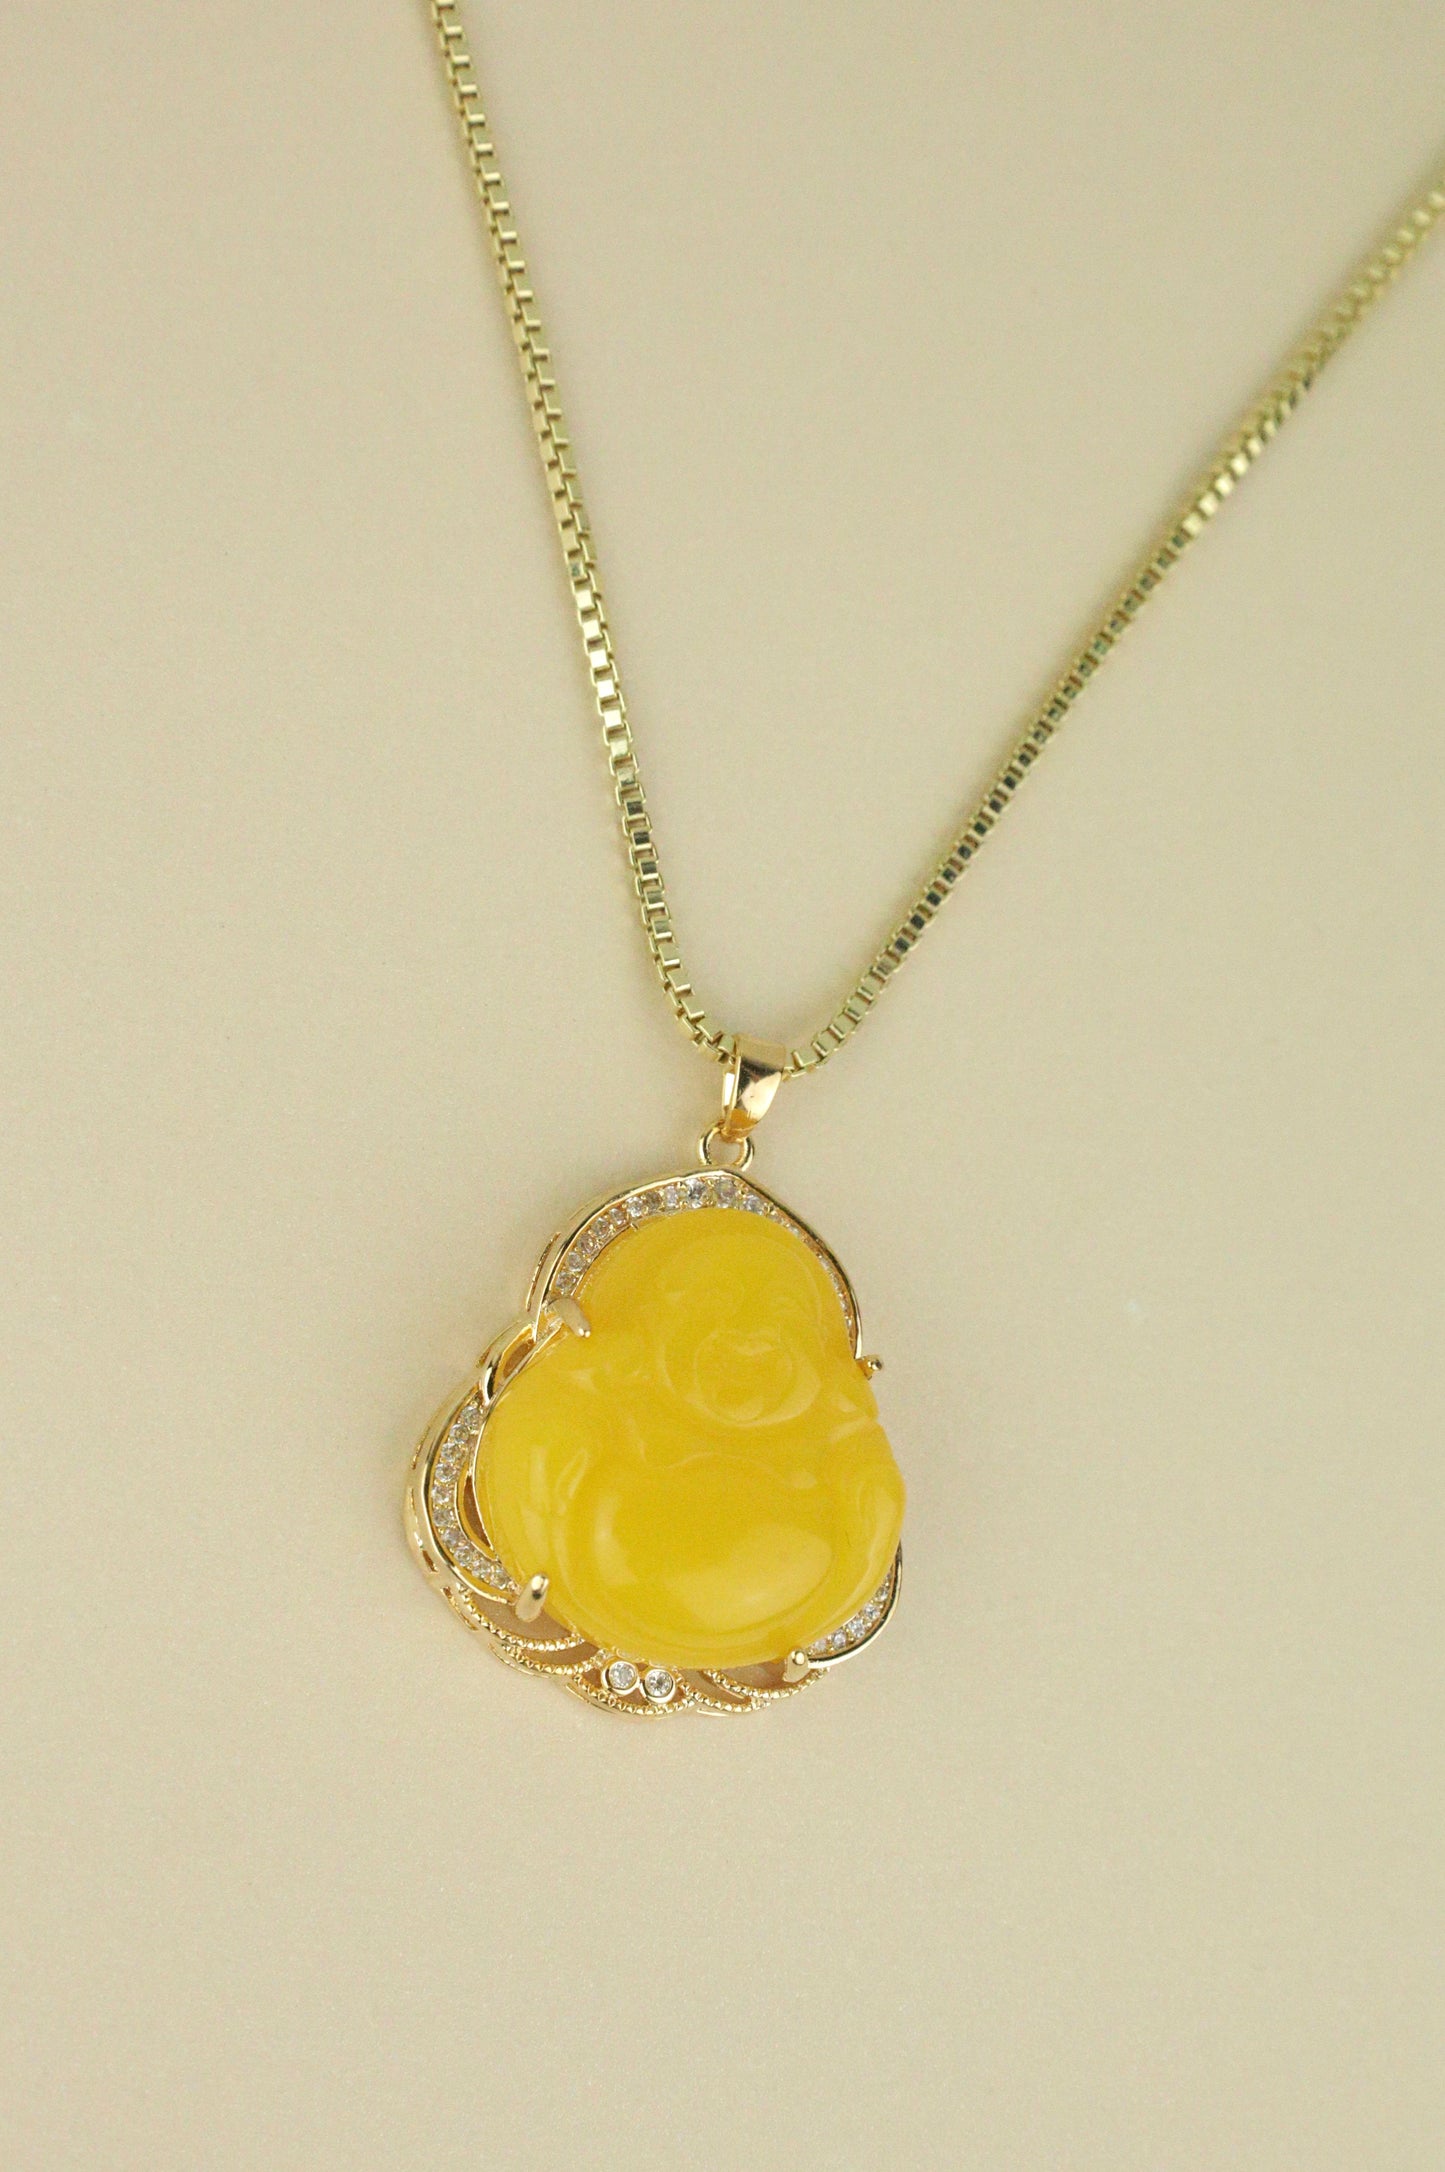 Yellow Buddha necklace in gold